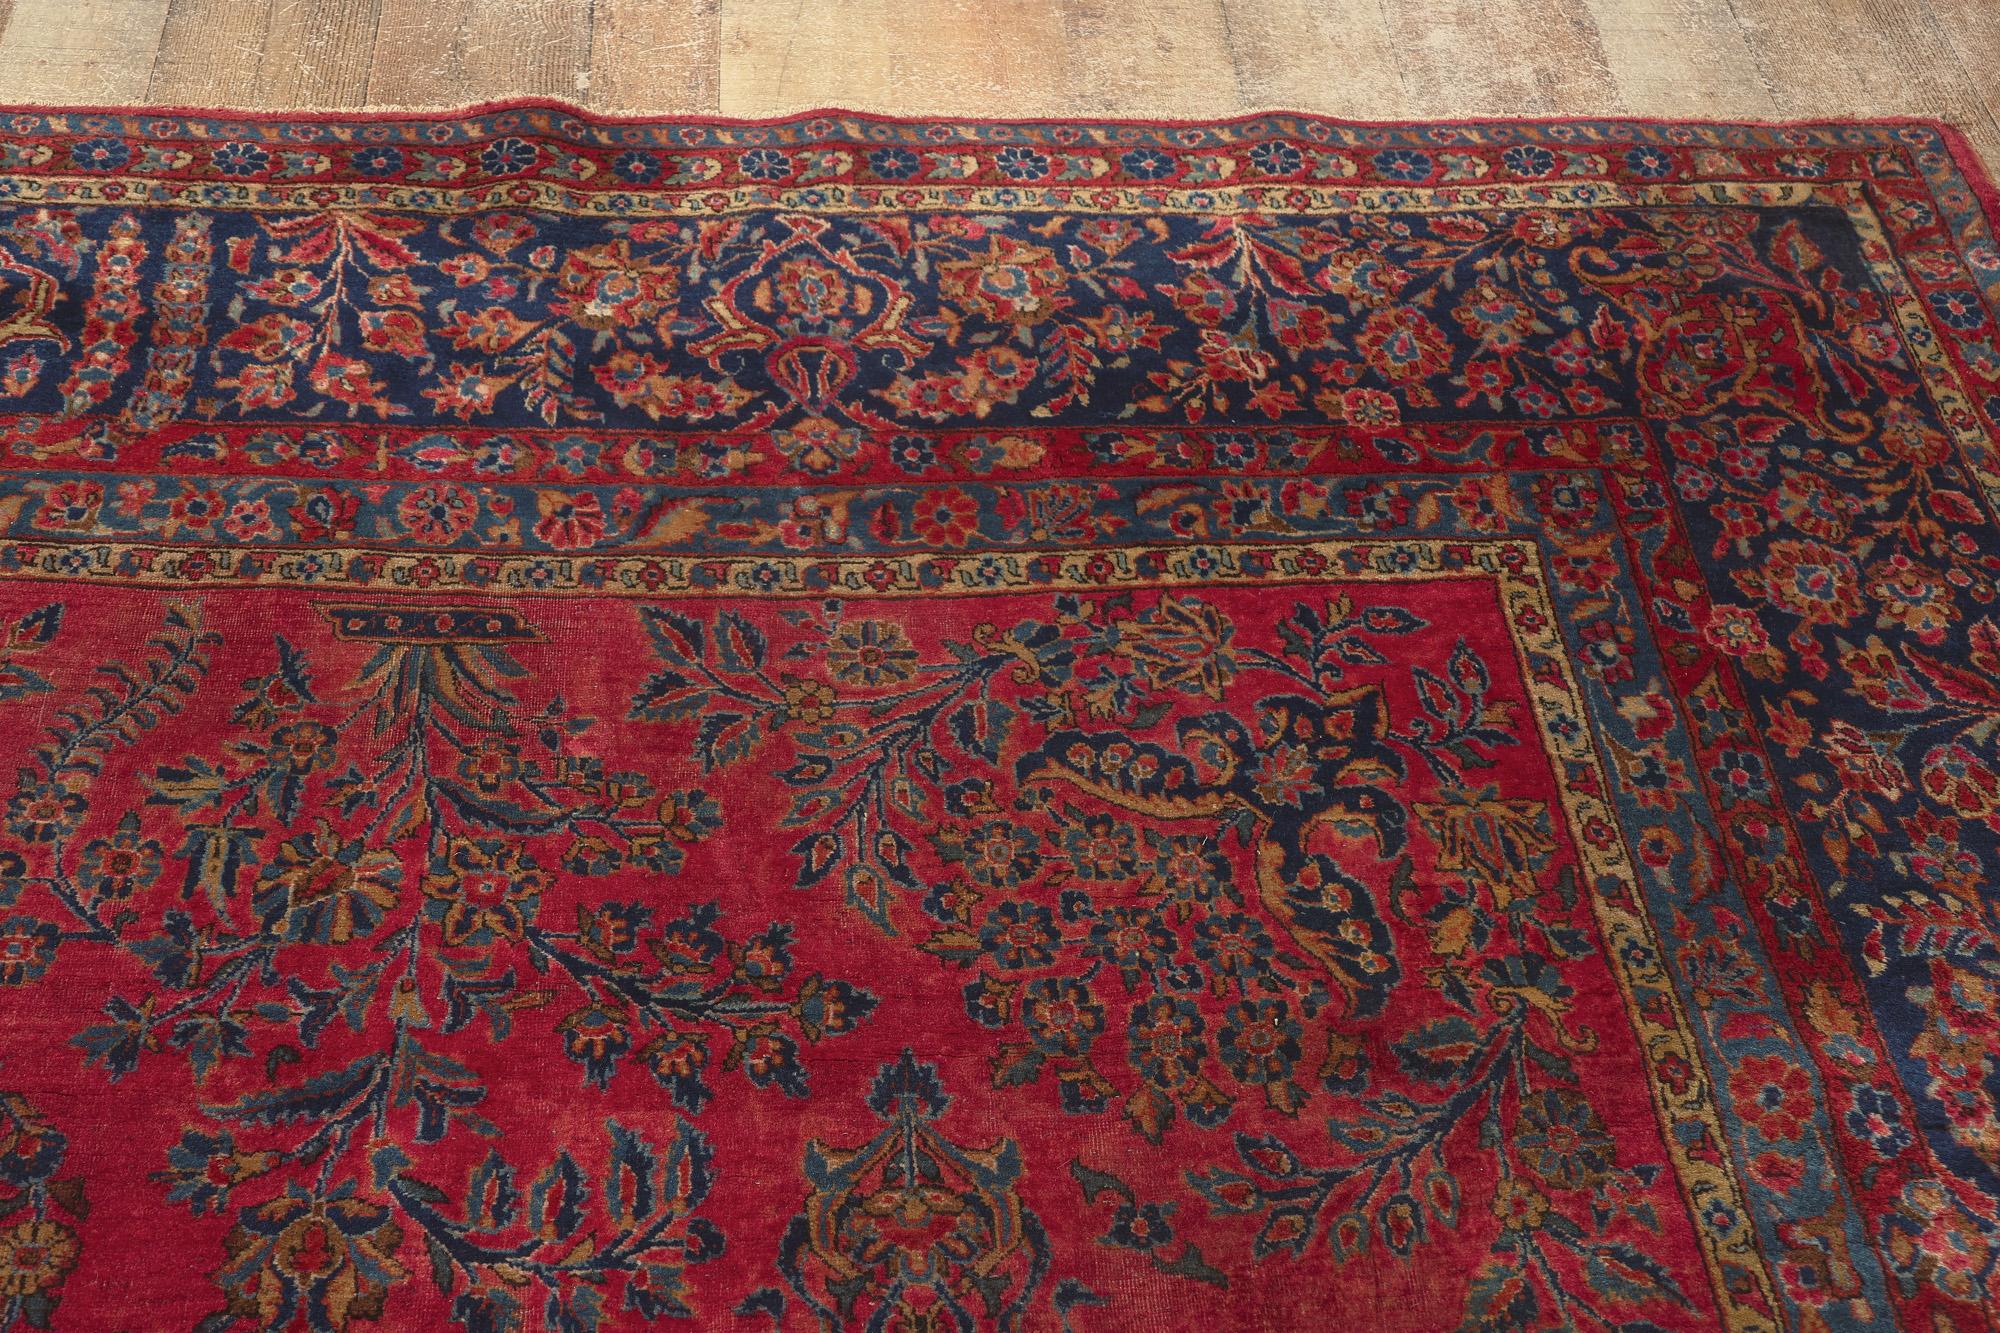 Antique Persian Kashan Rug with Art Nouveau Style in Rich Jewel Tones 4